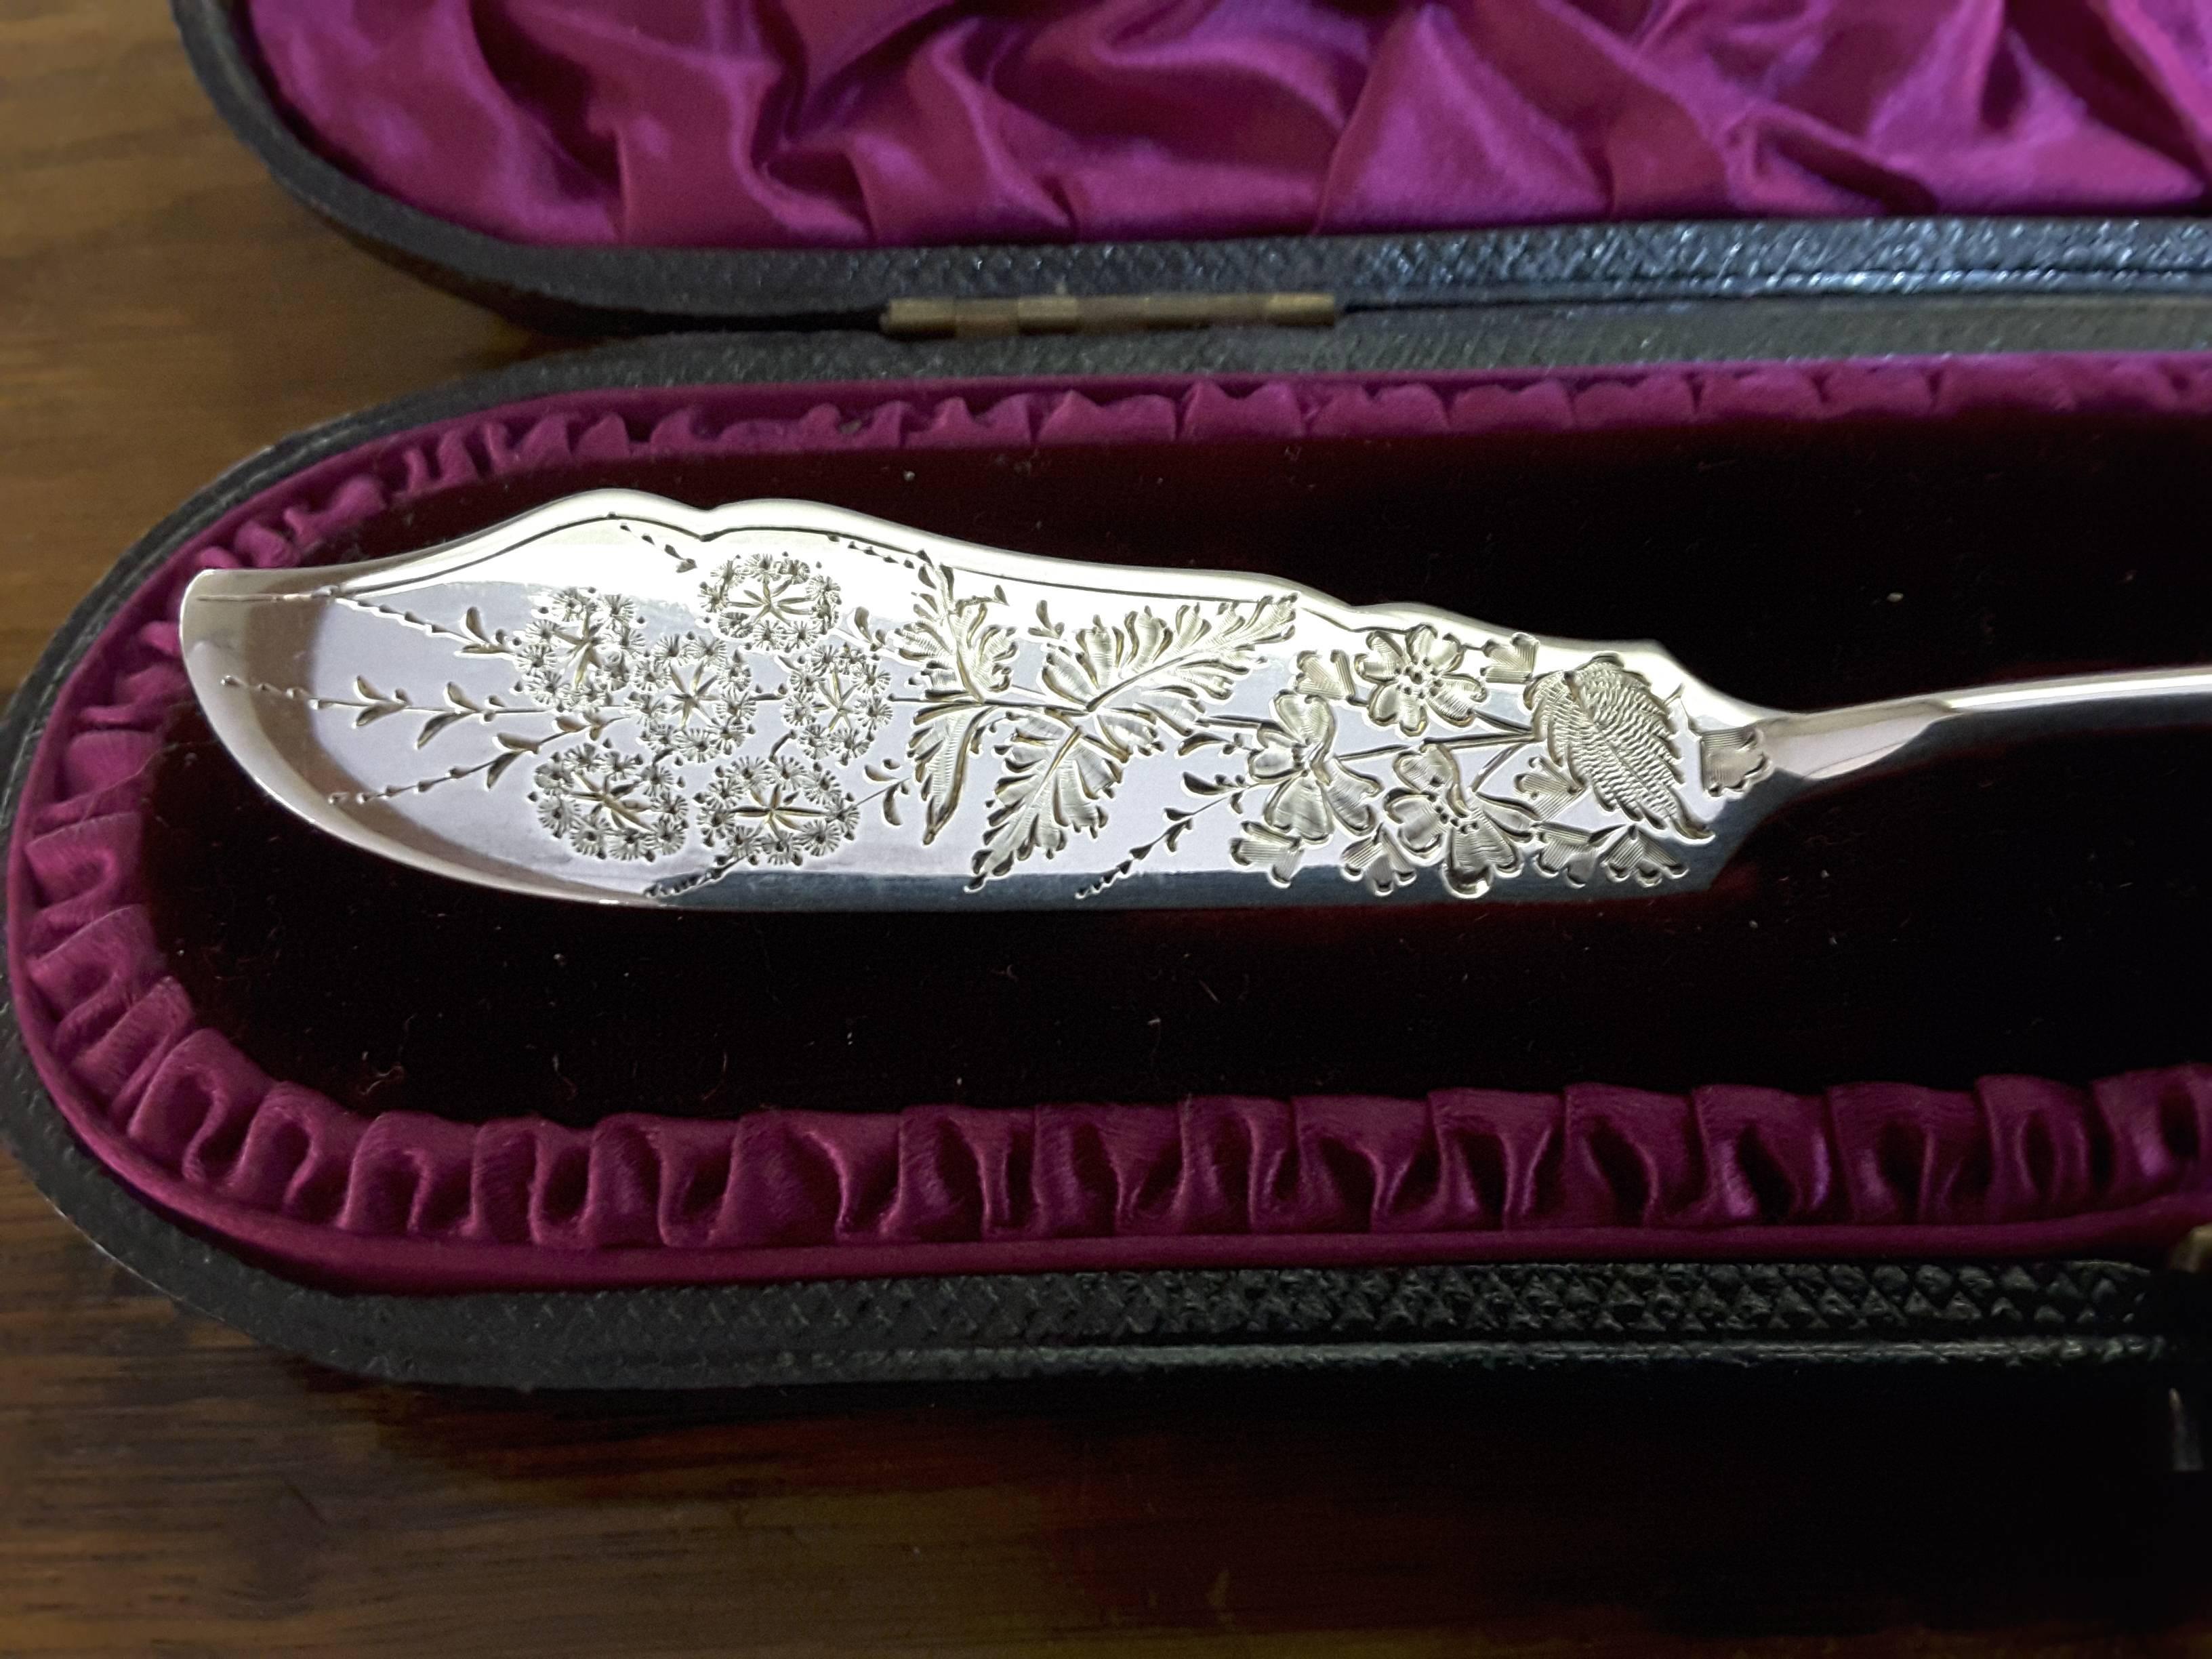 A sterling silver butter knife in a presentation case, London, hallmarked 1886, makers mark HA for Atkin Bros. (Henry Atkin). A nice sterling silver butter knife with detailed decoration, hallmarks on back, in the original leather case. The knife